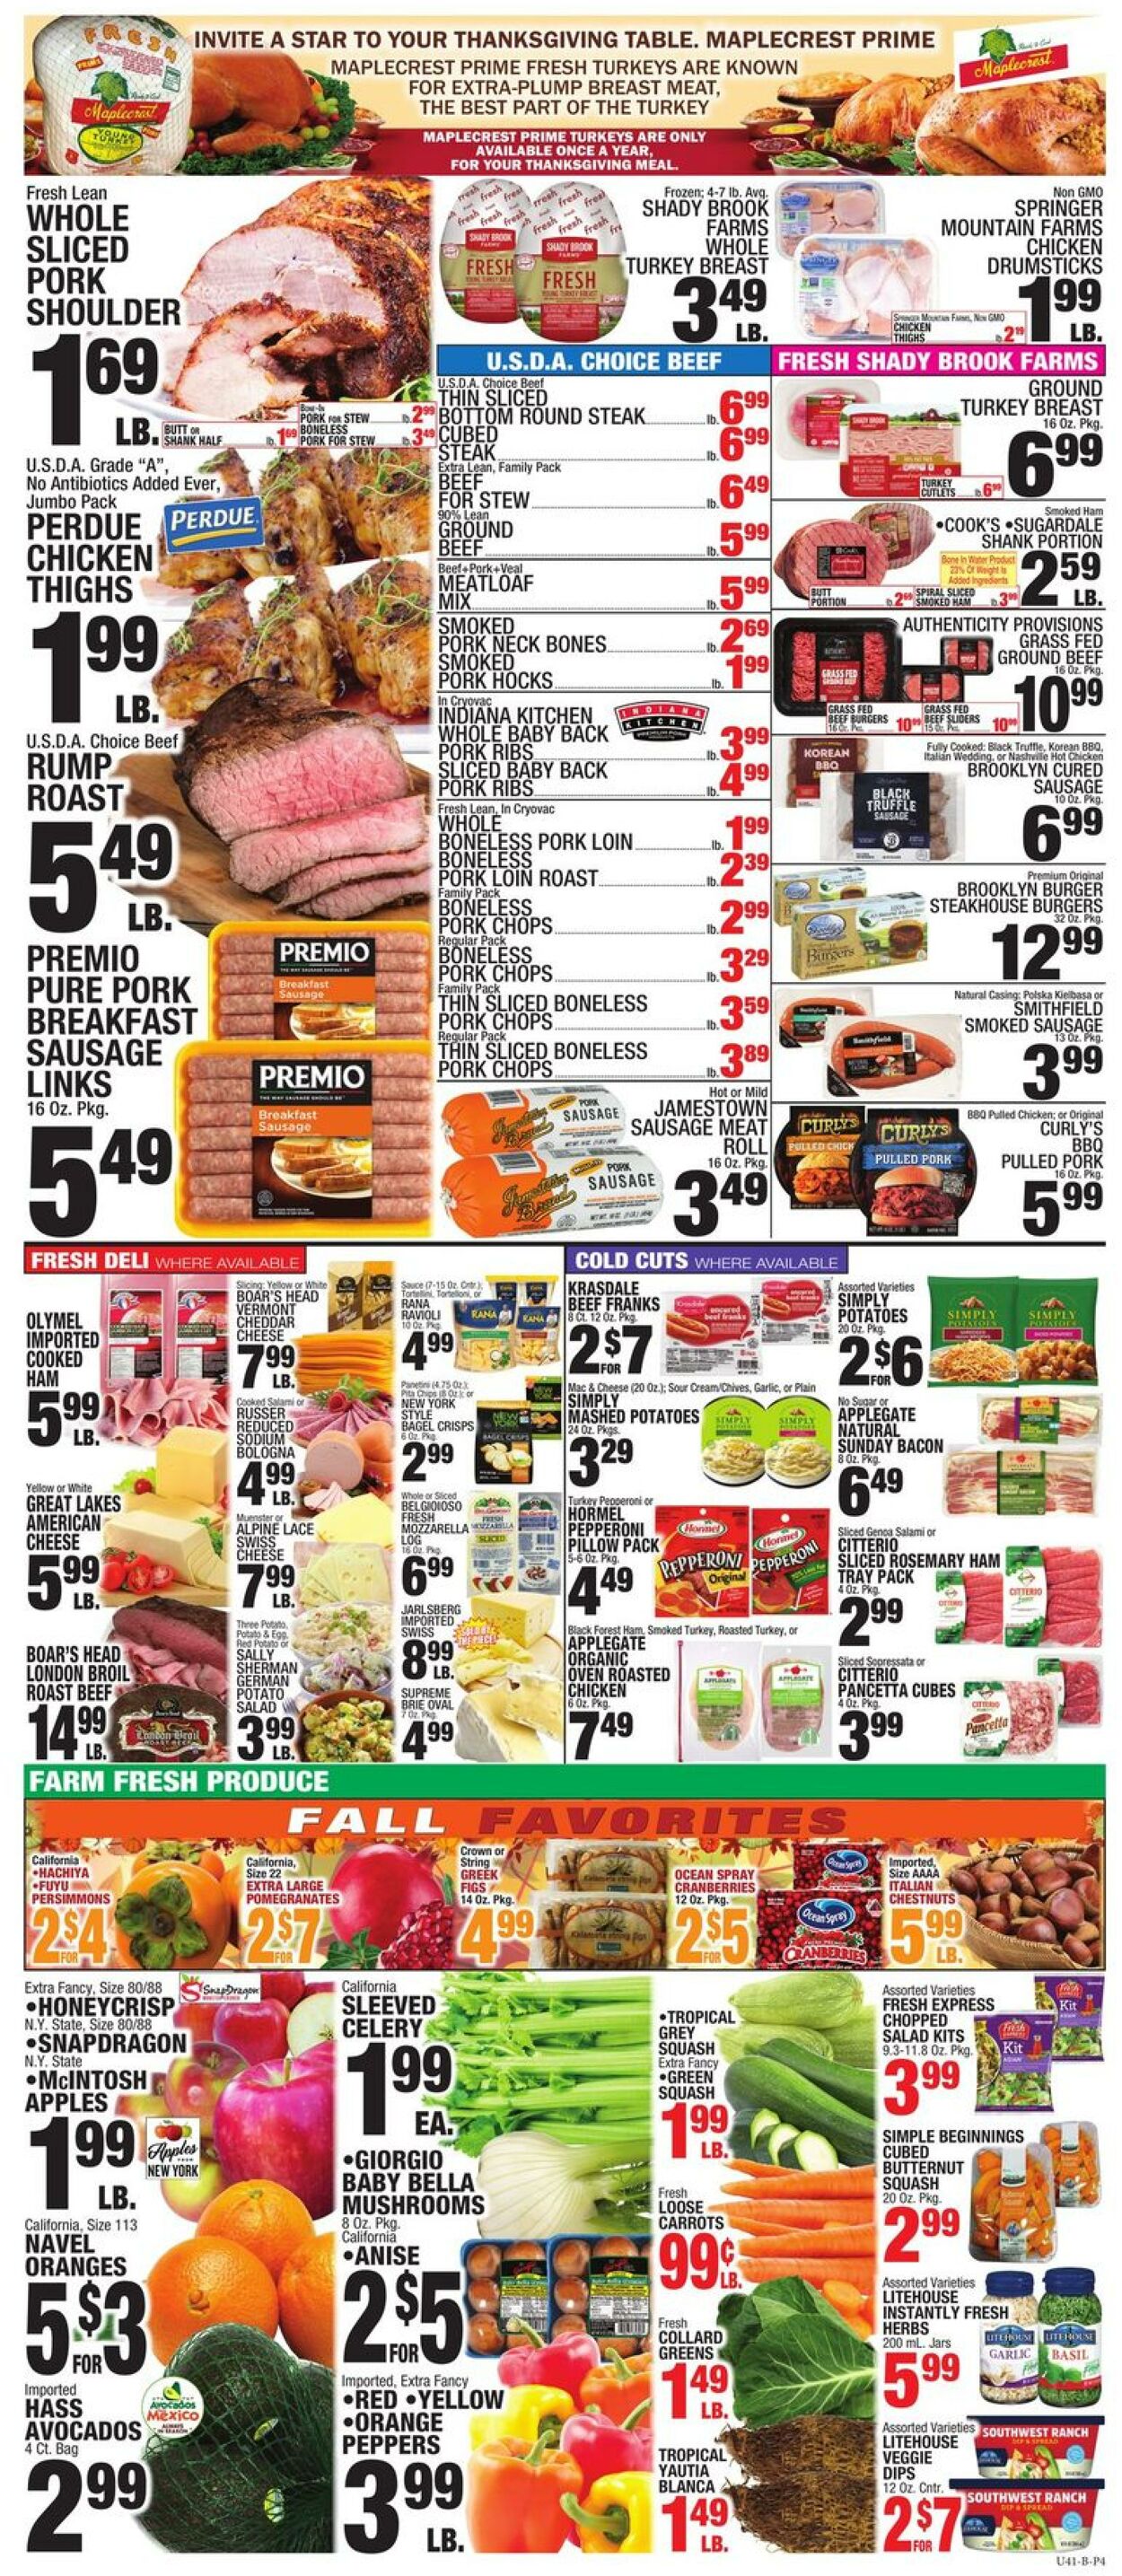 Weekly ad CTown 11/11/2022 - 11/17/2022